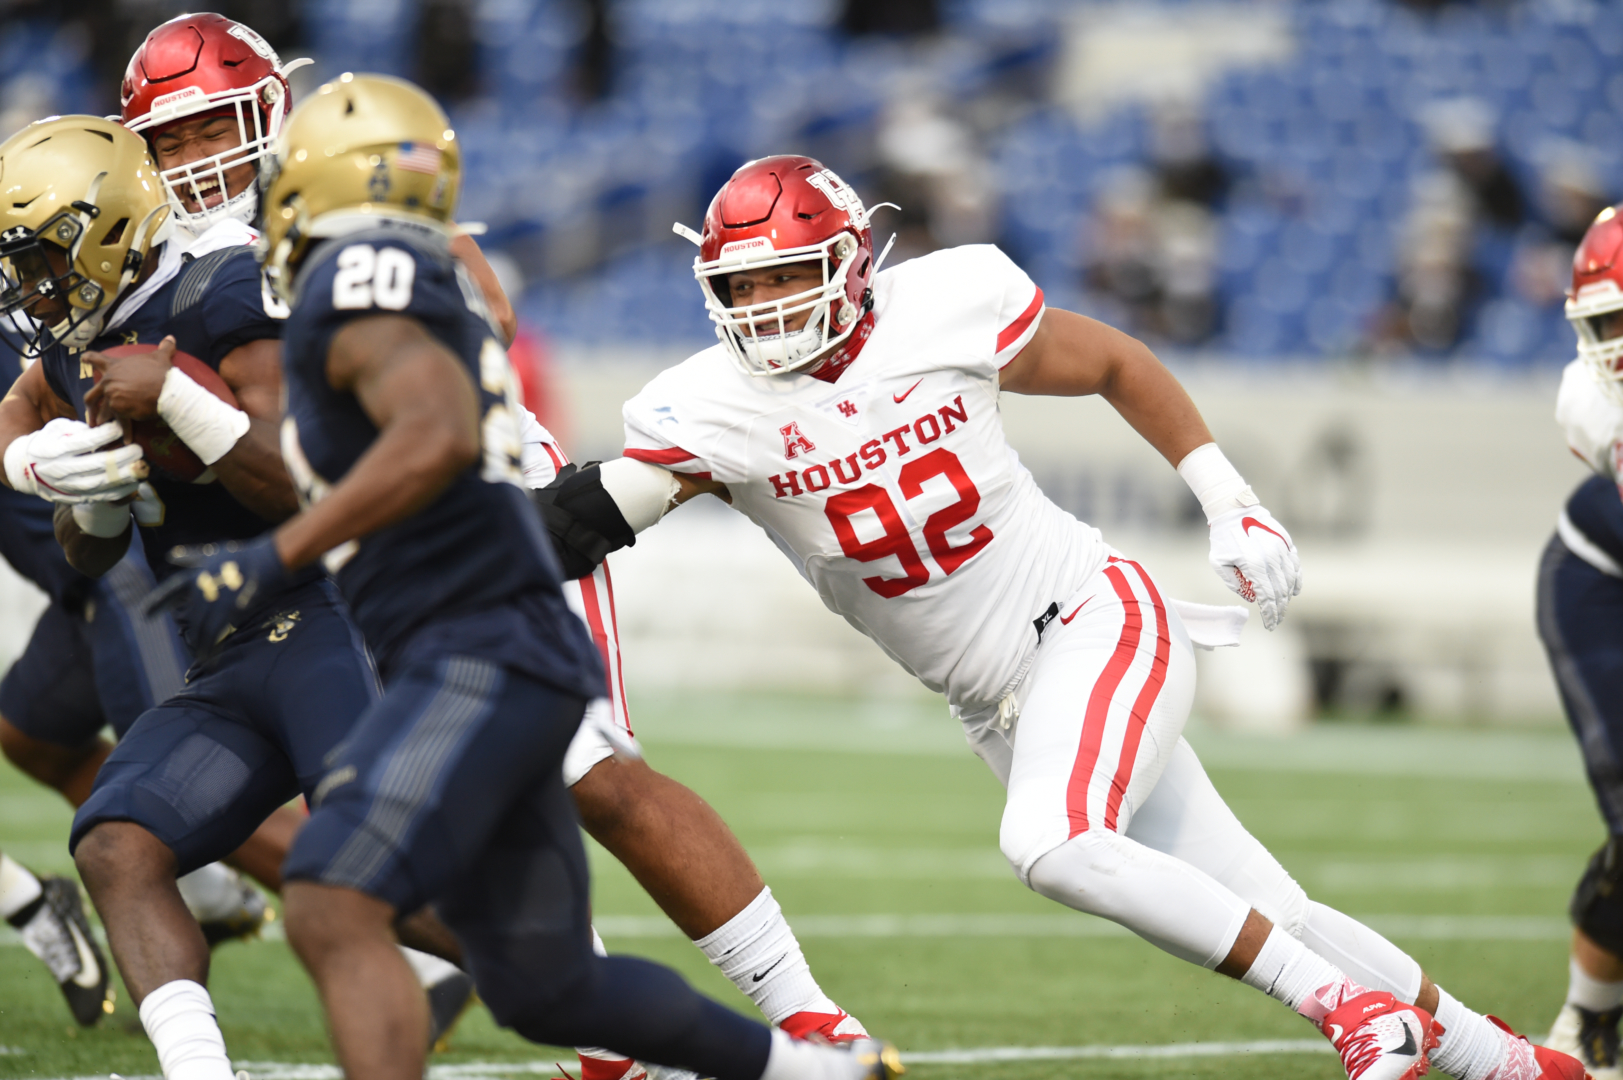 Logan Hall recorded 99 career tackles, including 8 sacks, during his four years as a Cougar. | Courtesy of UH athletics